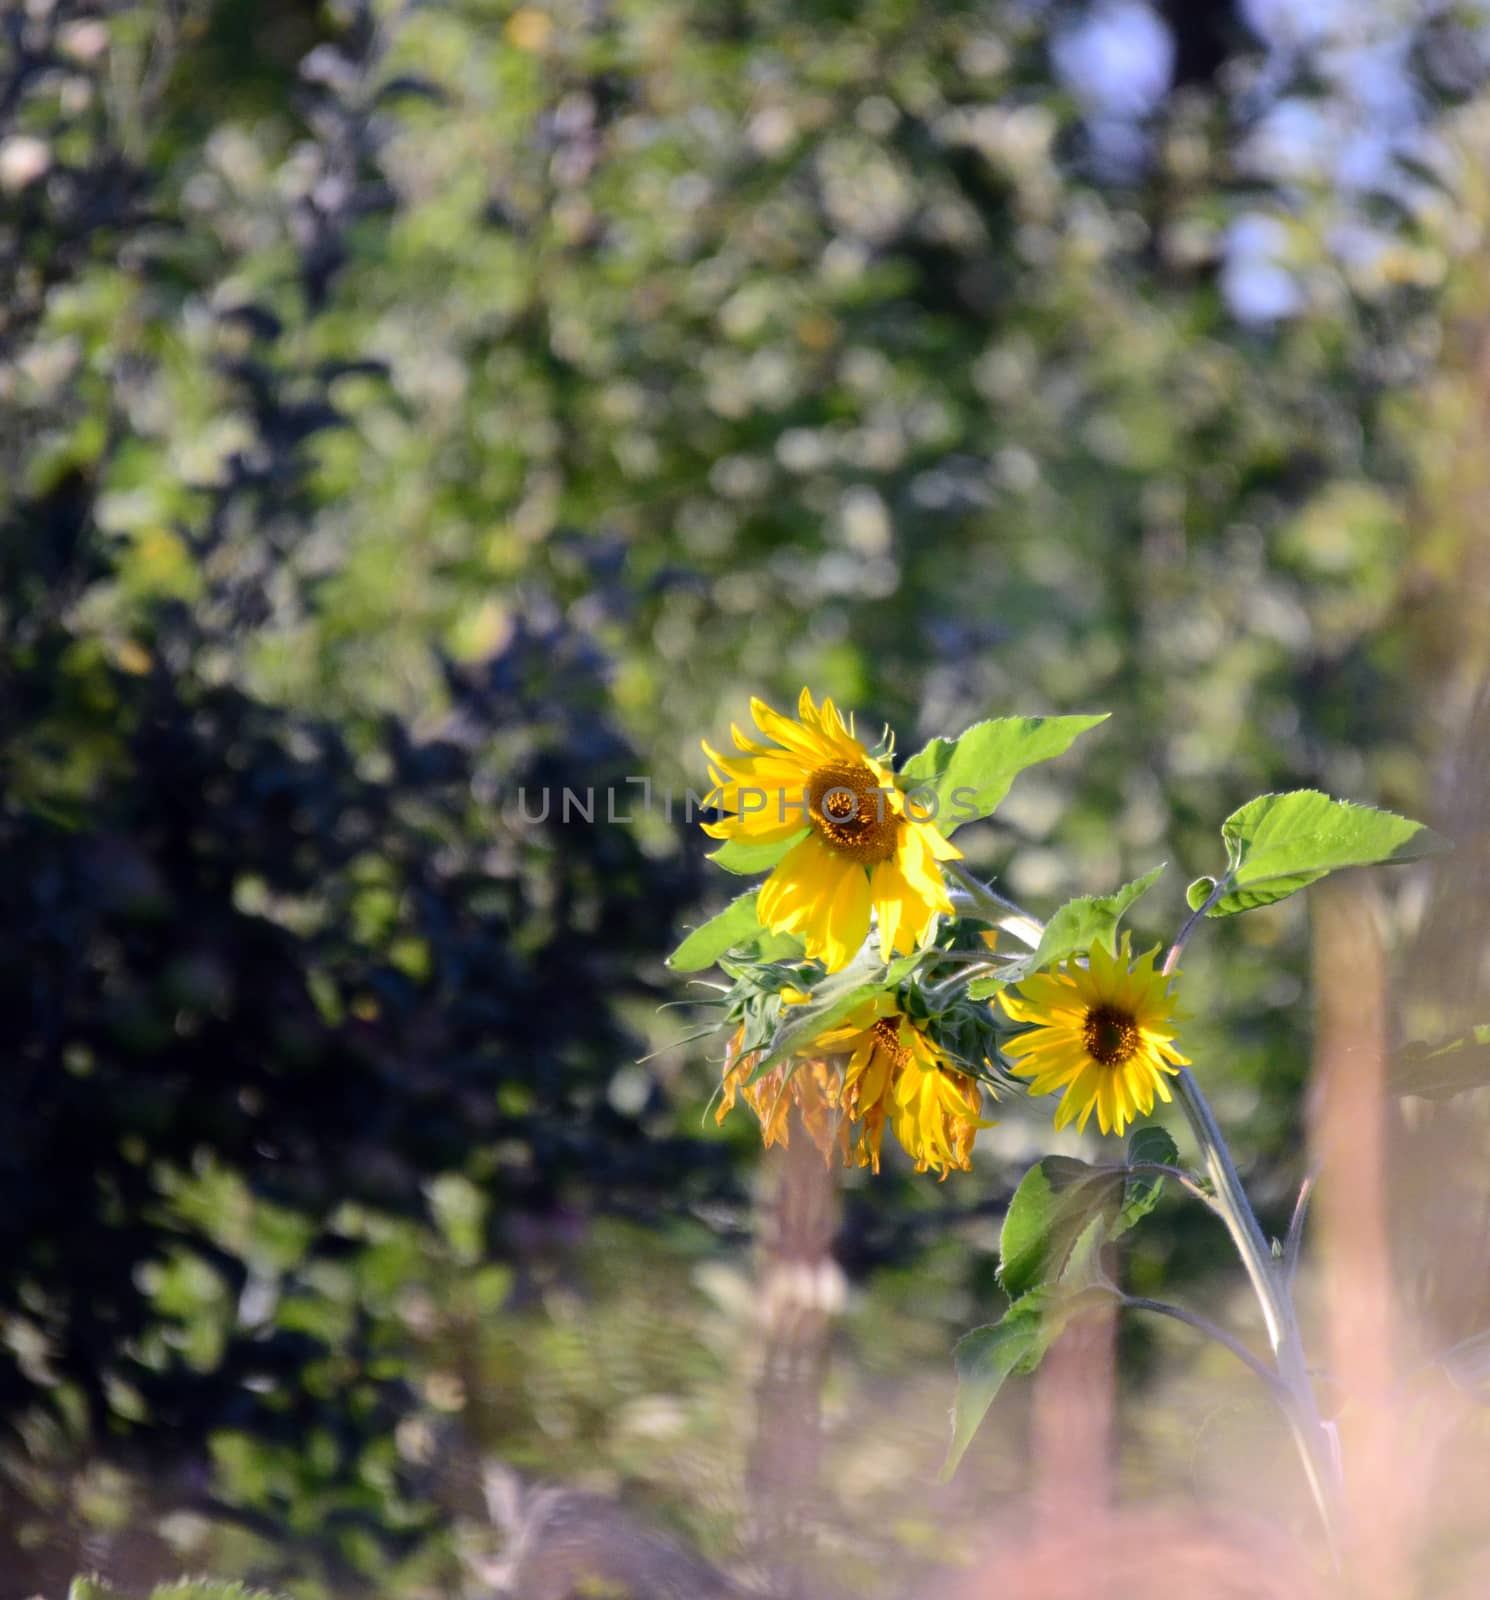 Picture of a Sunflowers on a morning light